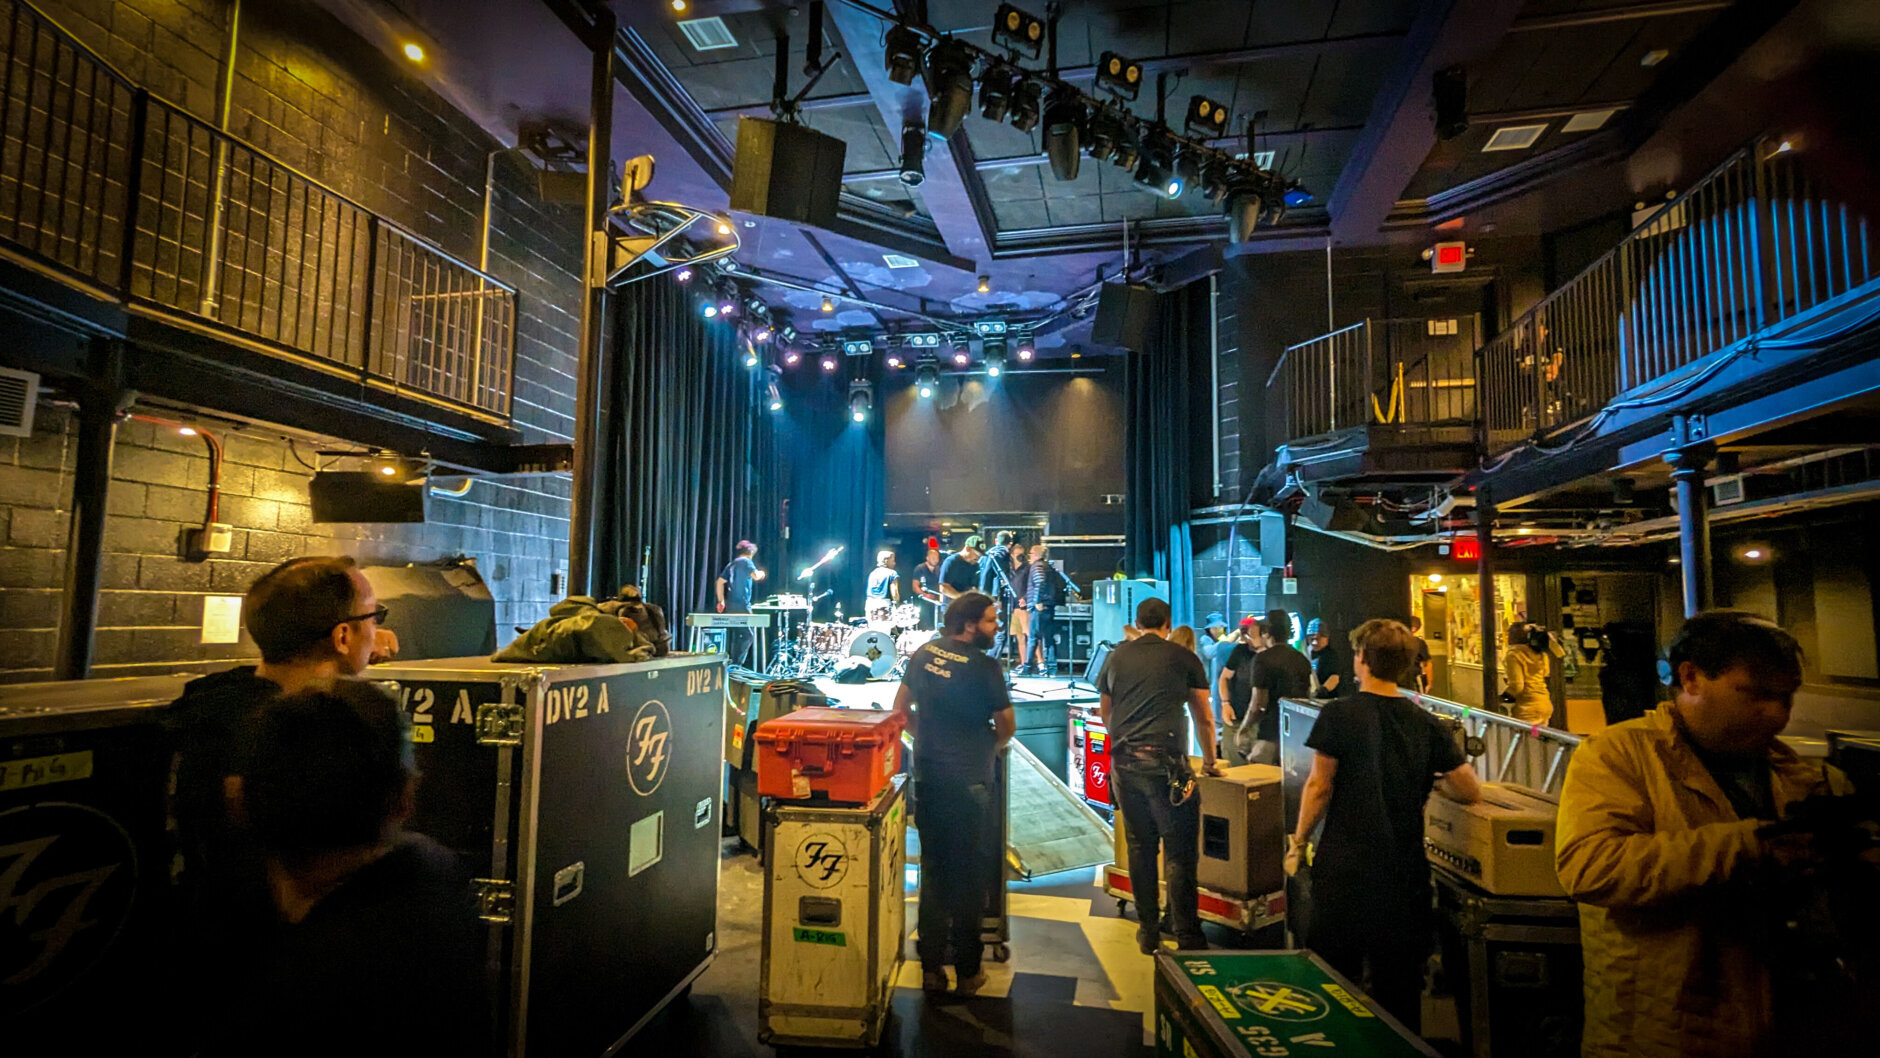 <p>Inside, the $10 million venue is inspired by the original 9:30 Club, which Grohl frequently visited in his time as a teenager; even the new stage is designed to be slightly off-kilter like its predecessor. The Atlantis has a capacity of 450, up from the 200-person capacity at the original 9:30 Club, but still significantly more intimate than the 1,200-person limit at the current 9:30 Club next door.</p>
<p>&#8220;There&#8217;s nothing like seeing a band in a small place,&#8221; Hurwitz told reporters on Tuesday. &#8220;When you go in there and see a band, and they&#8217;re as close to you as you guys are to me right now, there&#8217;s nothing like it.&#8221;</p>
<p>The new Atlantis still has a pole and crow&#8217;s nest, but it&#8217;s far less obtrusive in its current position — off to the side of the stage — than its predecessor. It also features a narrow, second-floor balcony.</p>
